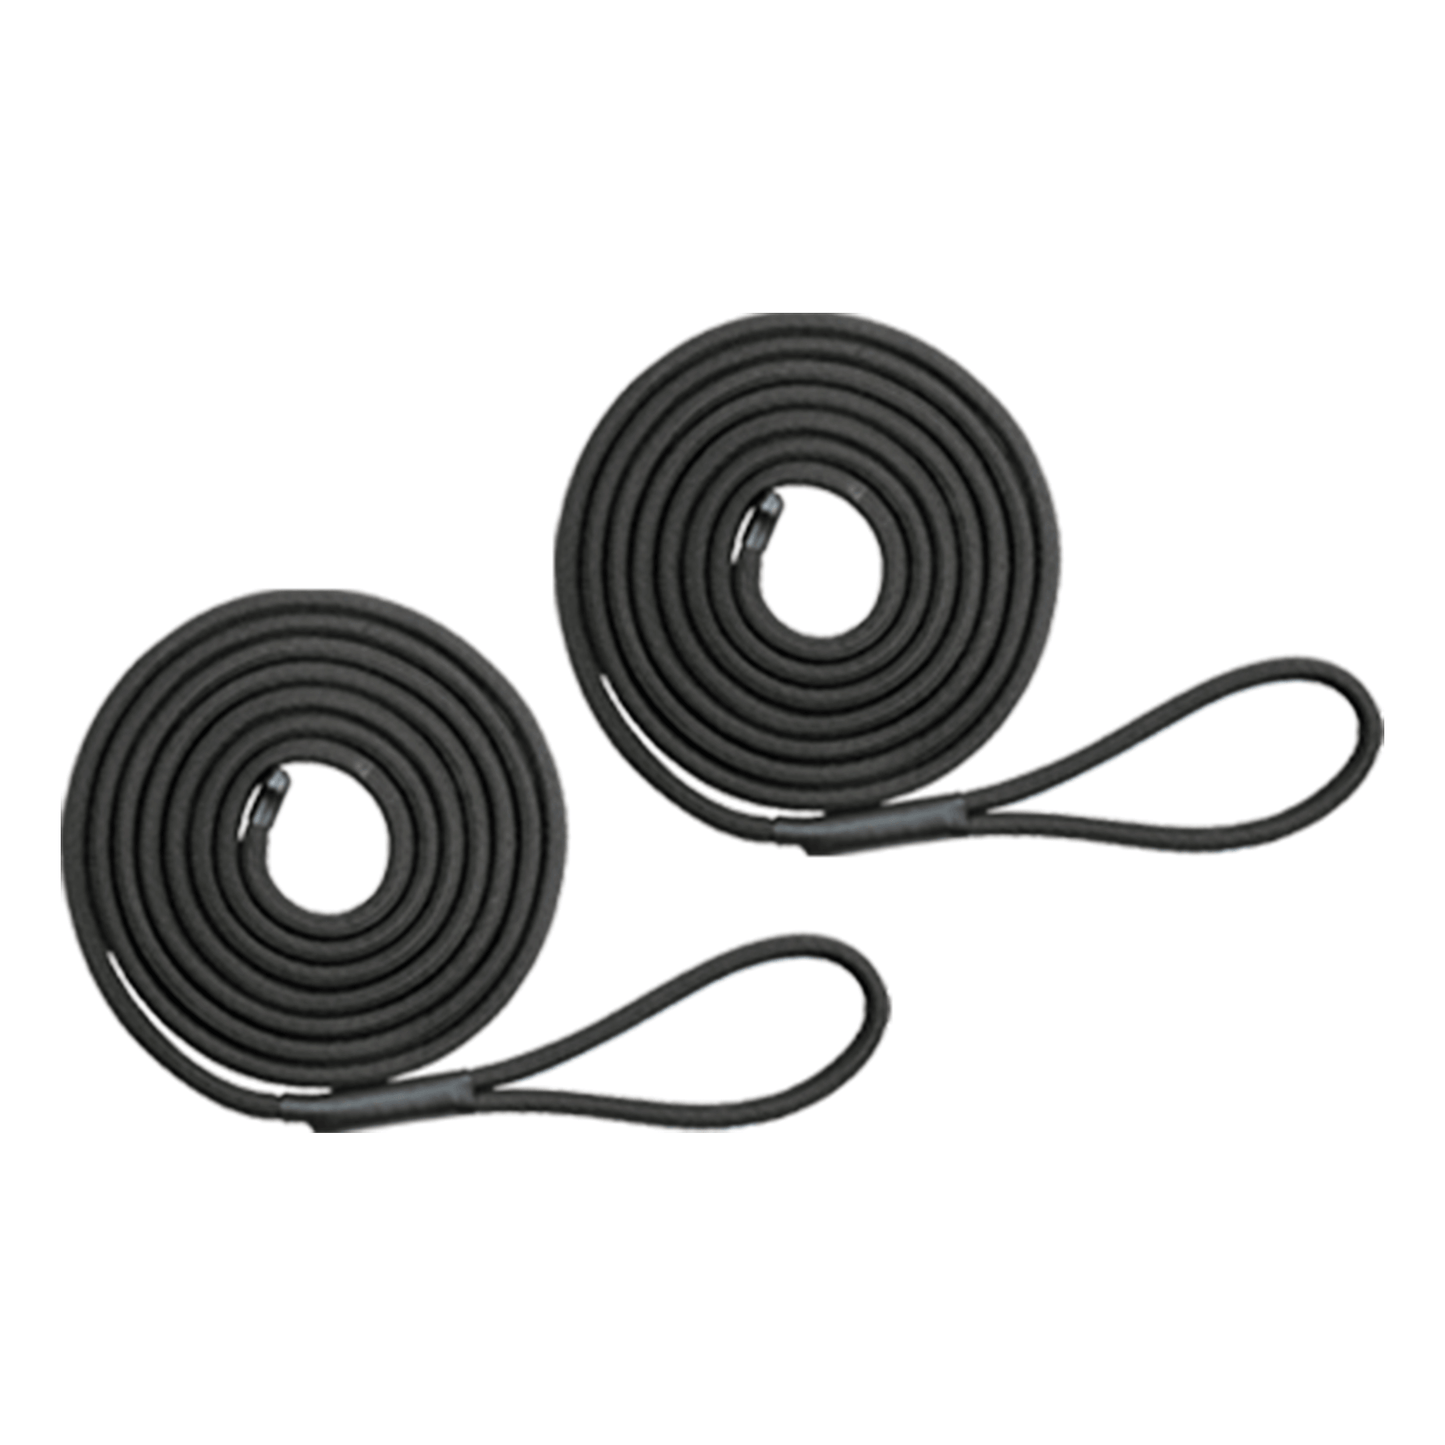  BASI Systems Pilates Ropes (Pairs) by BASI Systems sold by Pilates Matters® by BSP LLC